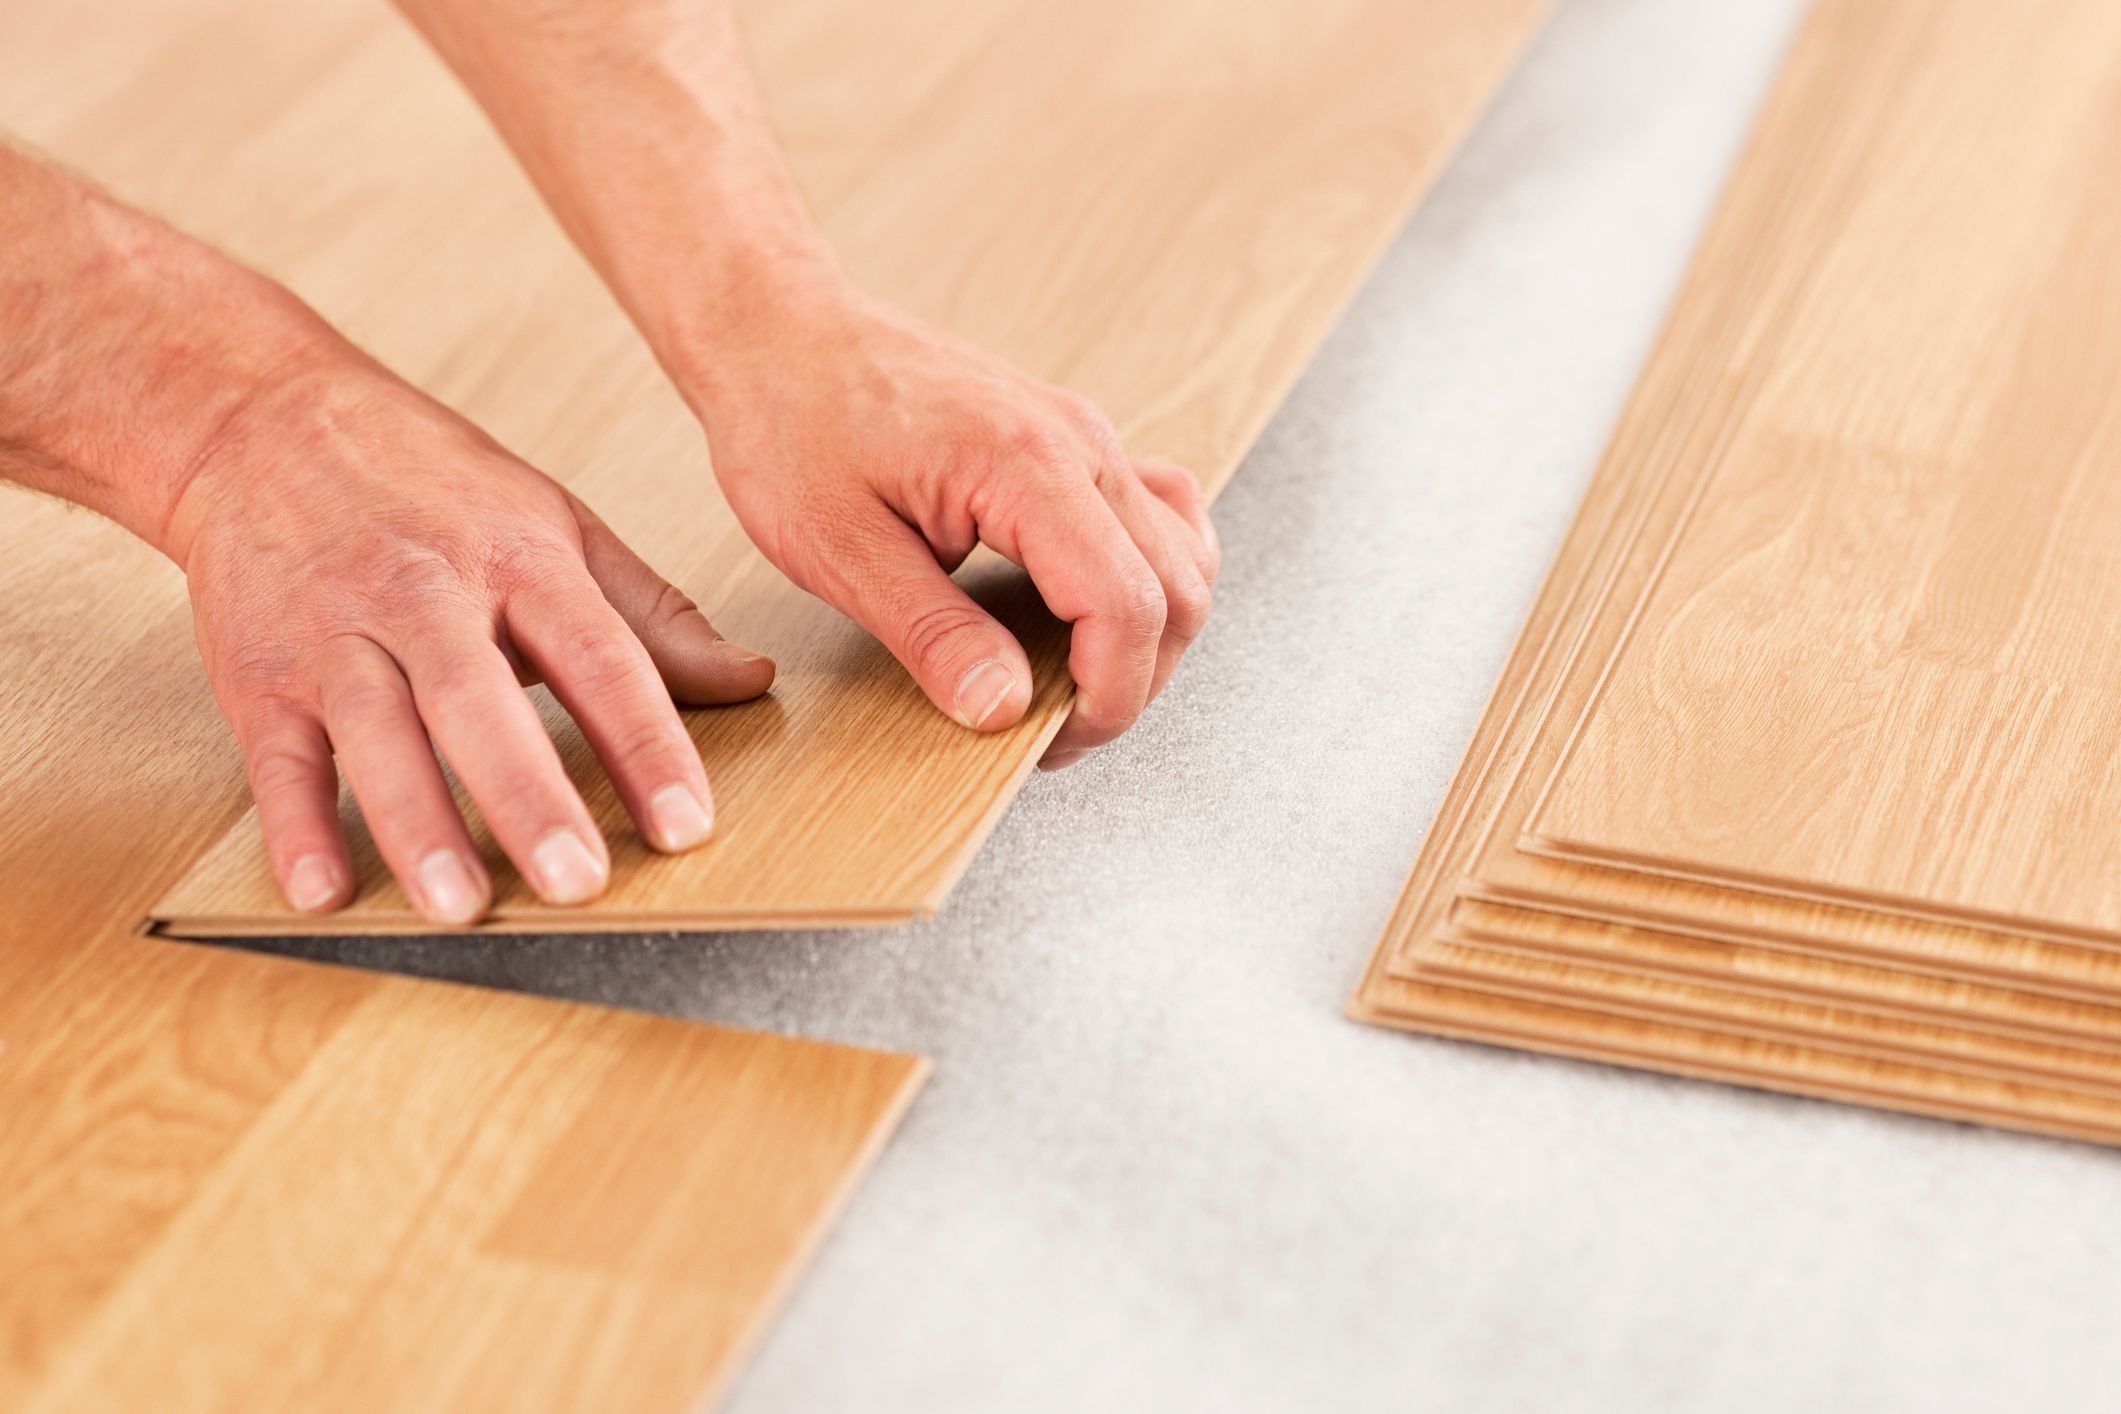 29 Lovely Hardwood Floor Repair Gaps In the Planks 2024 free download hardwood floor repair gaps in the planks of laminate underlayment pros and cons within laminate floor install gettyimages 154961561 588816495f9b58bdb3da1a02